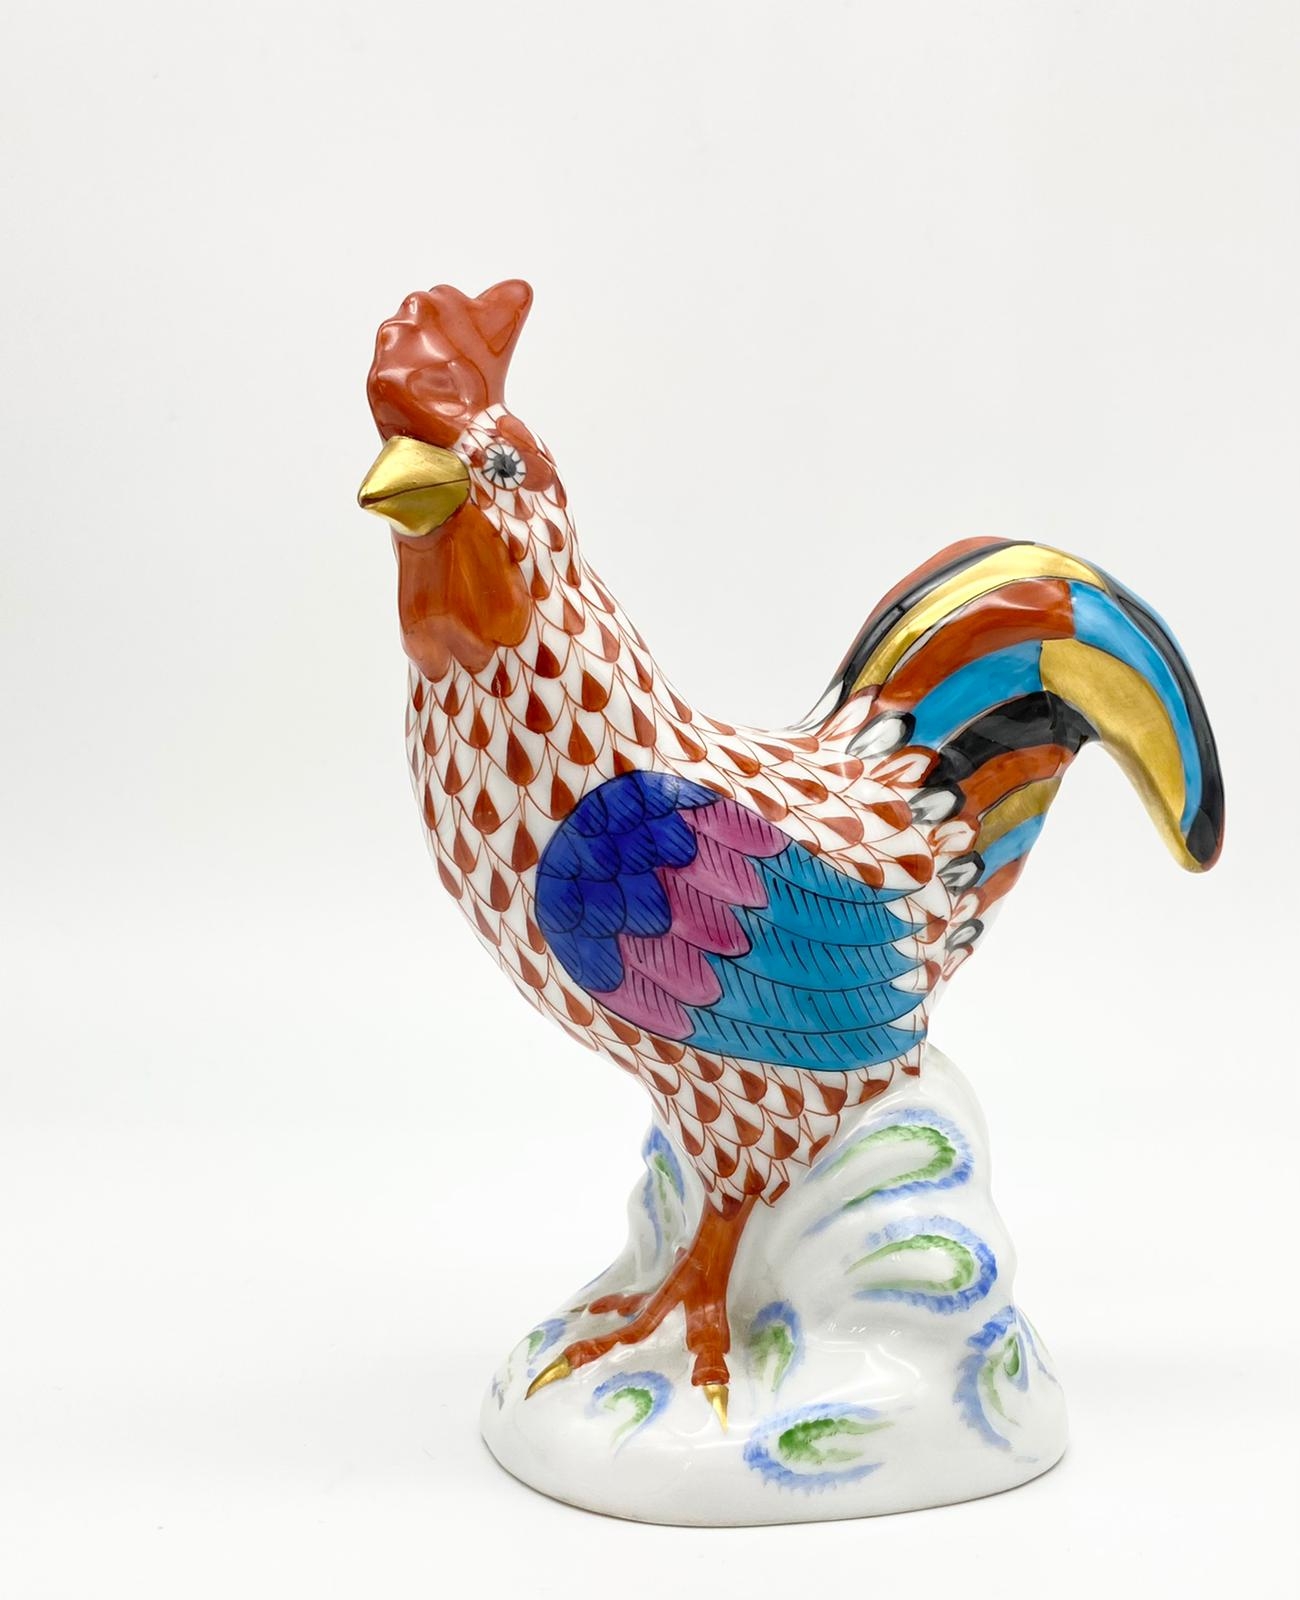 Herend Porcelain Rooster Figurine. Beautifully Hand-painted. Very Good Condition. 15cm tall.